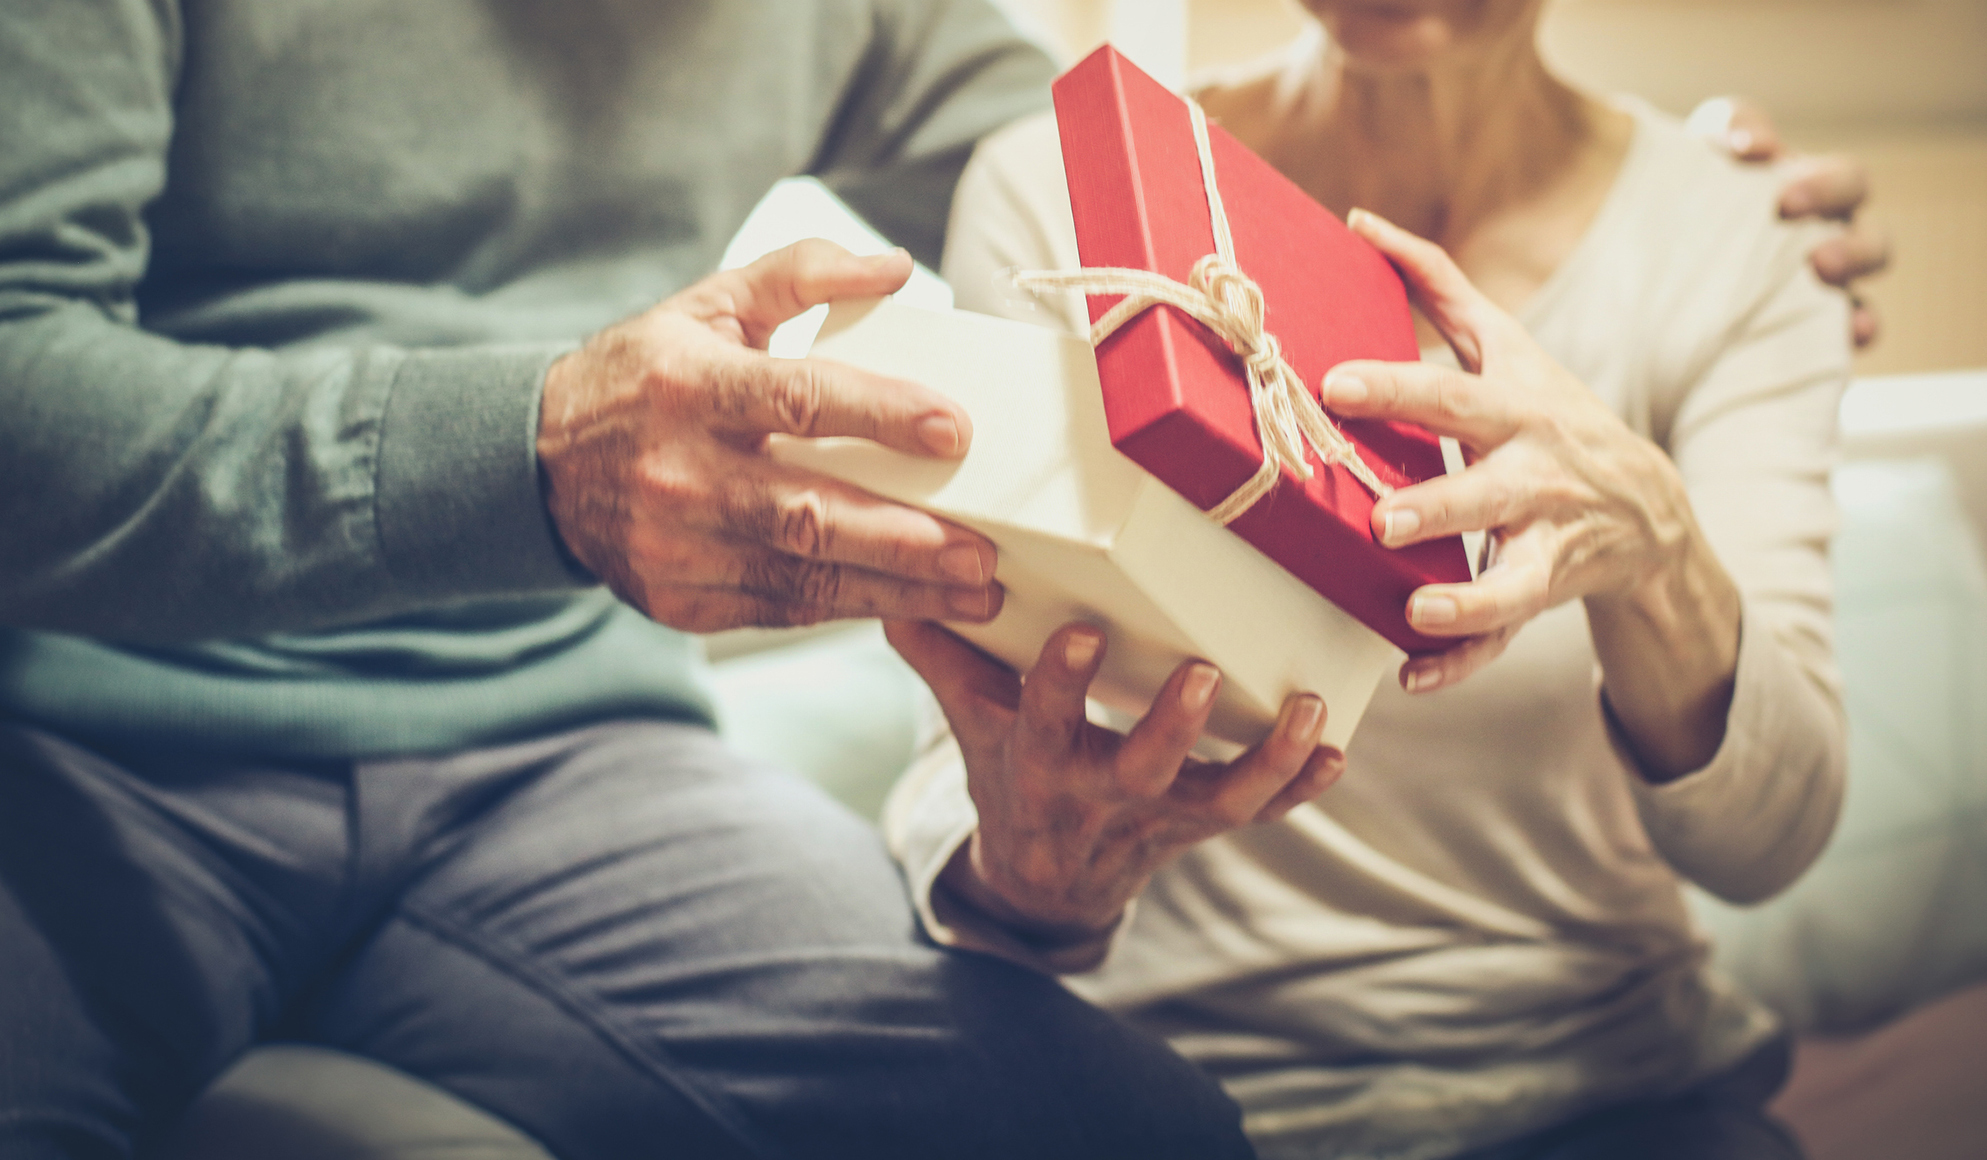 17 Gifts to Make Life Easier for Elderly (Big Hit with my Grandparents!)